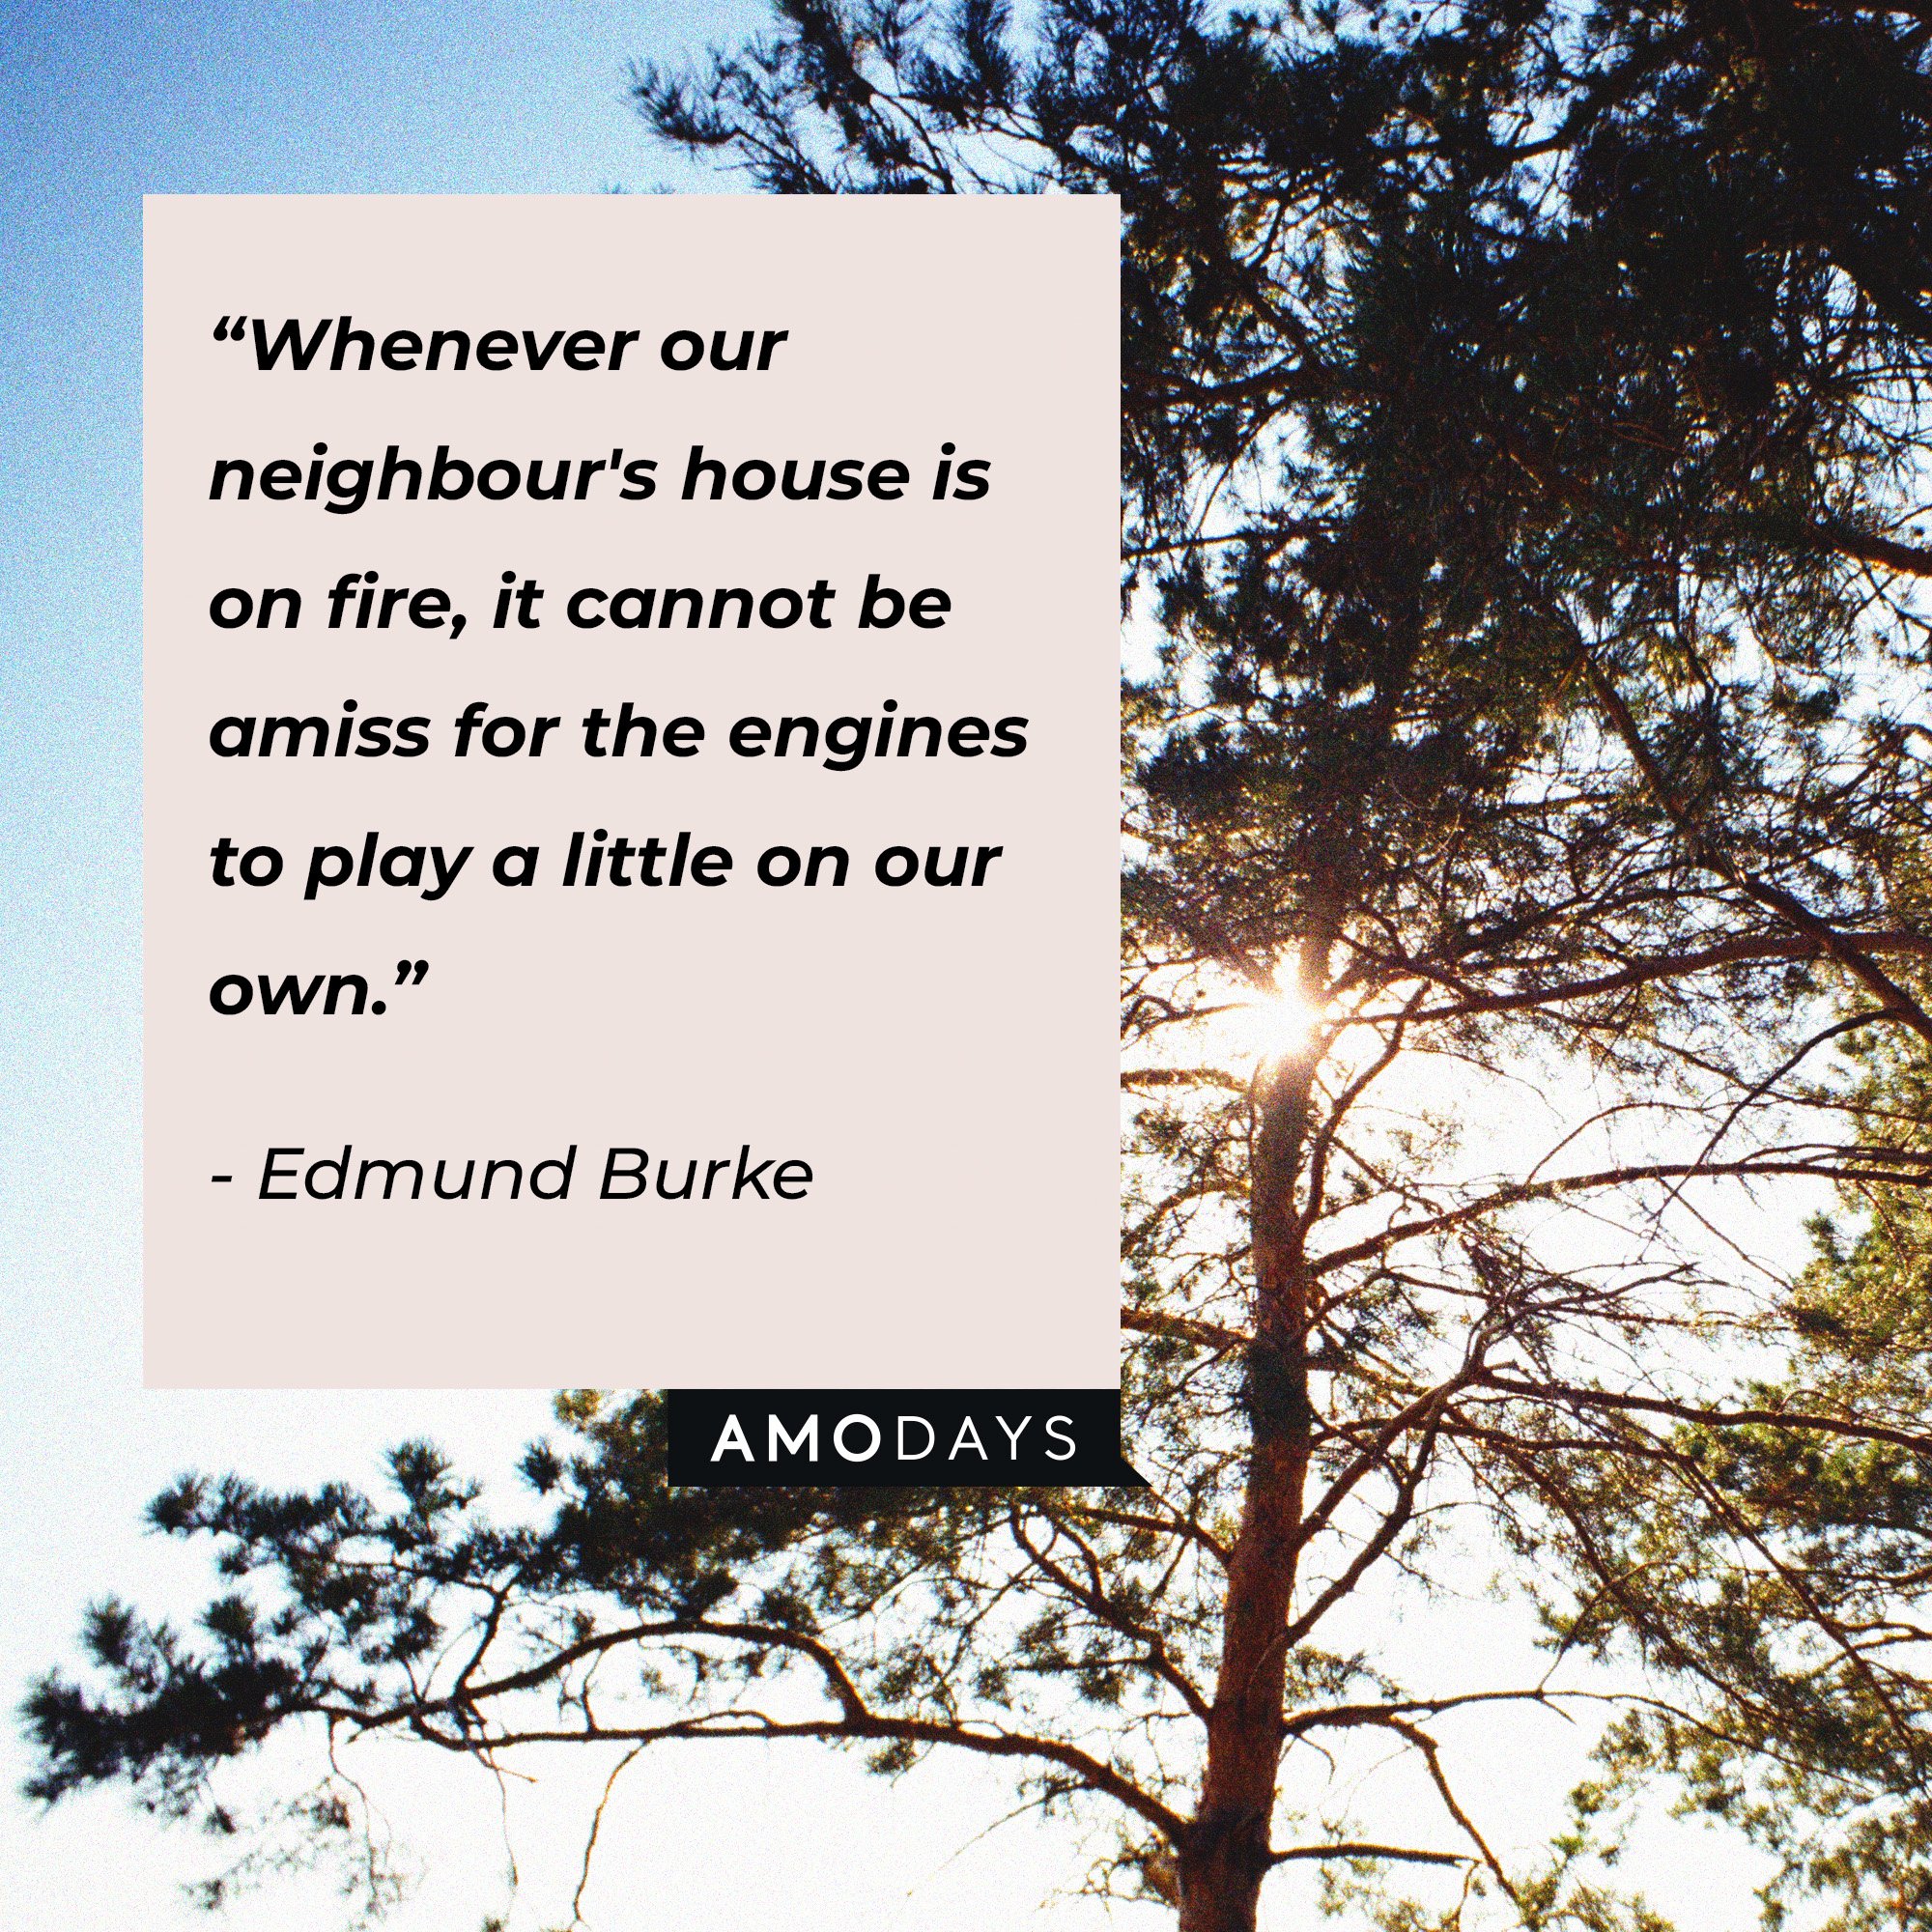  Edmund Burke's quote: “Whenever our neighbor's house is on fire, it cannot be amiss for the engines to play a little on our own.” | Image: AmoDays